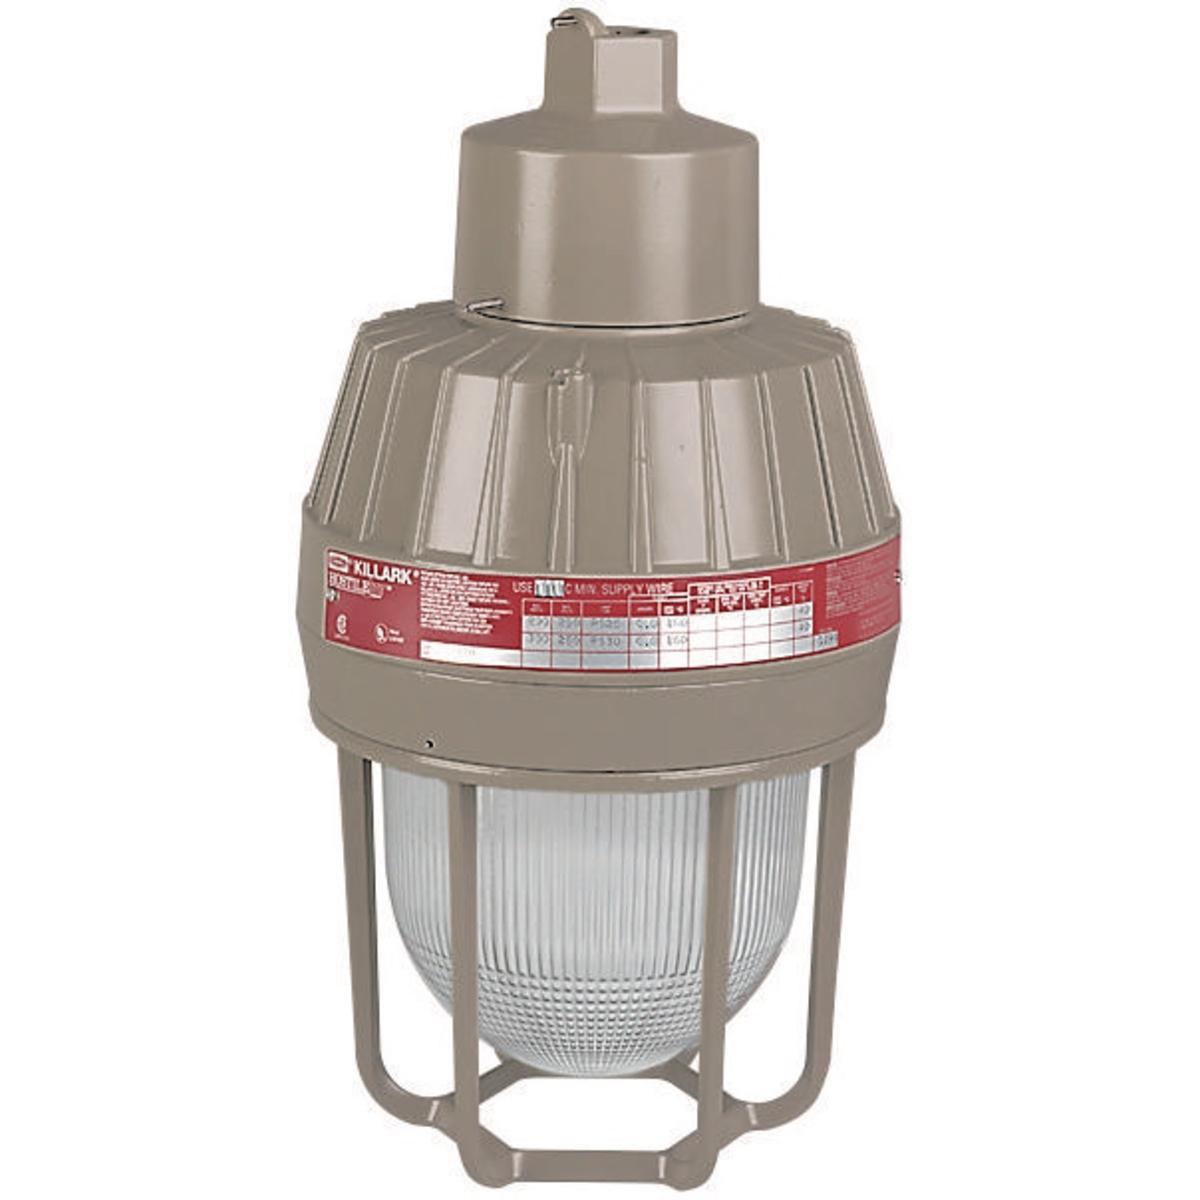 Hubbell EMS351A2G HID 35W Fluorescent 120V HPS 3/4" Pendant with Guard  ; Four light sources—Incandescent, compact fluorescent, high pressure sodium and metal halide ; Mounting choice—Pendant, ceiling, 25˚ stanchion or 90˚ wall mount, all with “wireless” design that allows